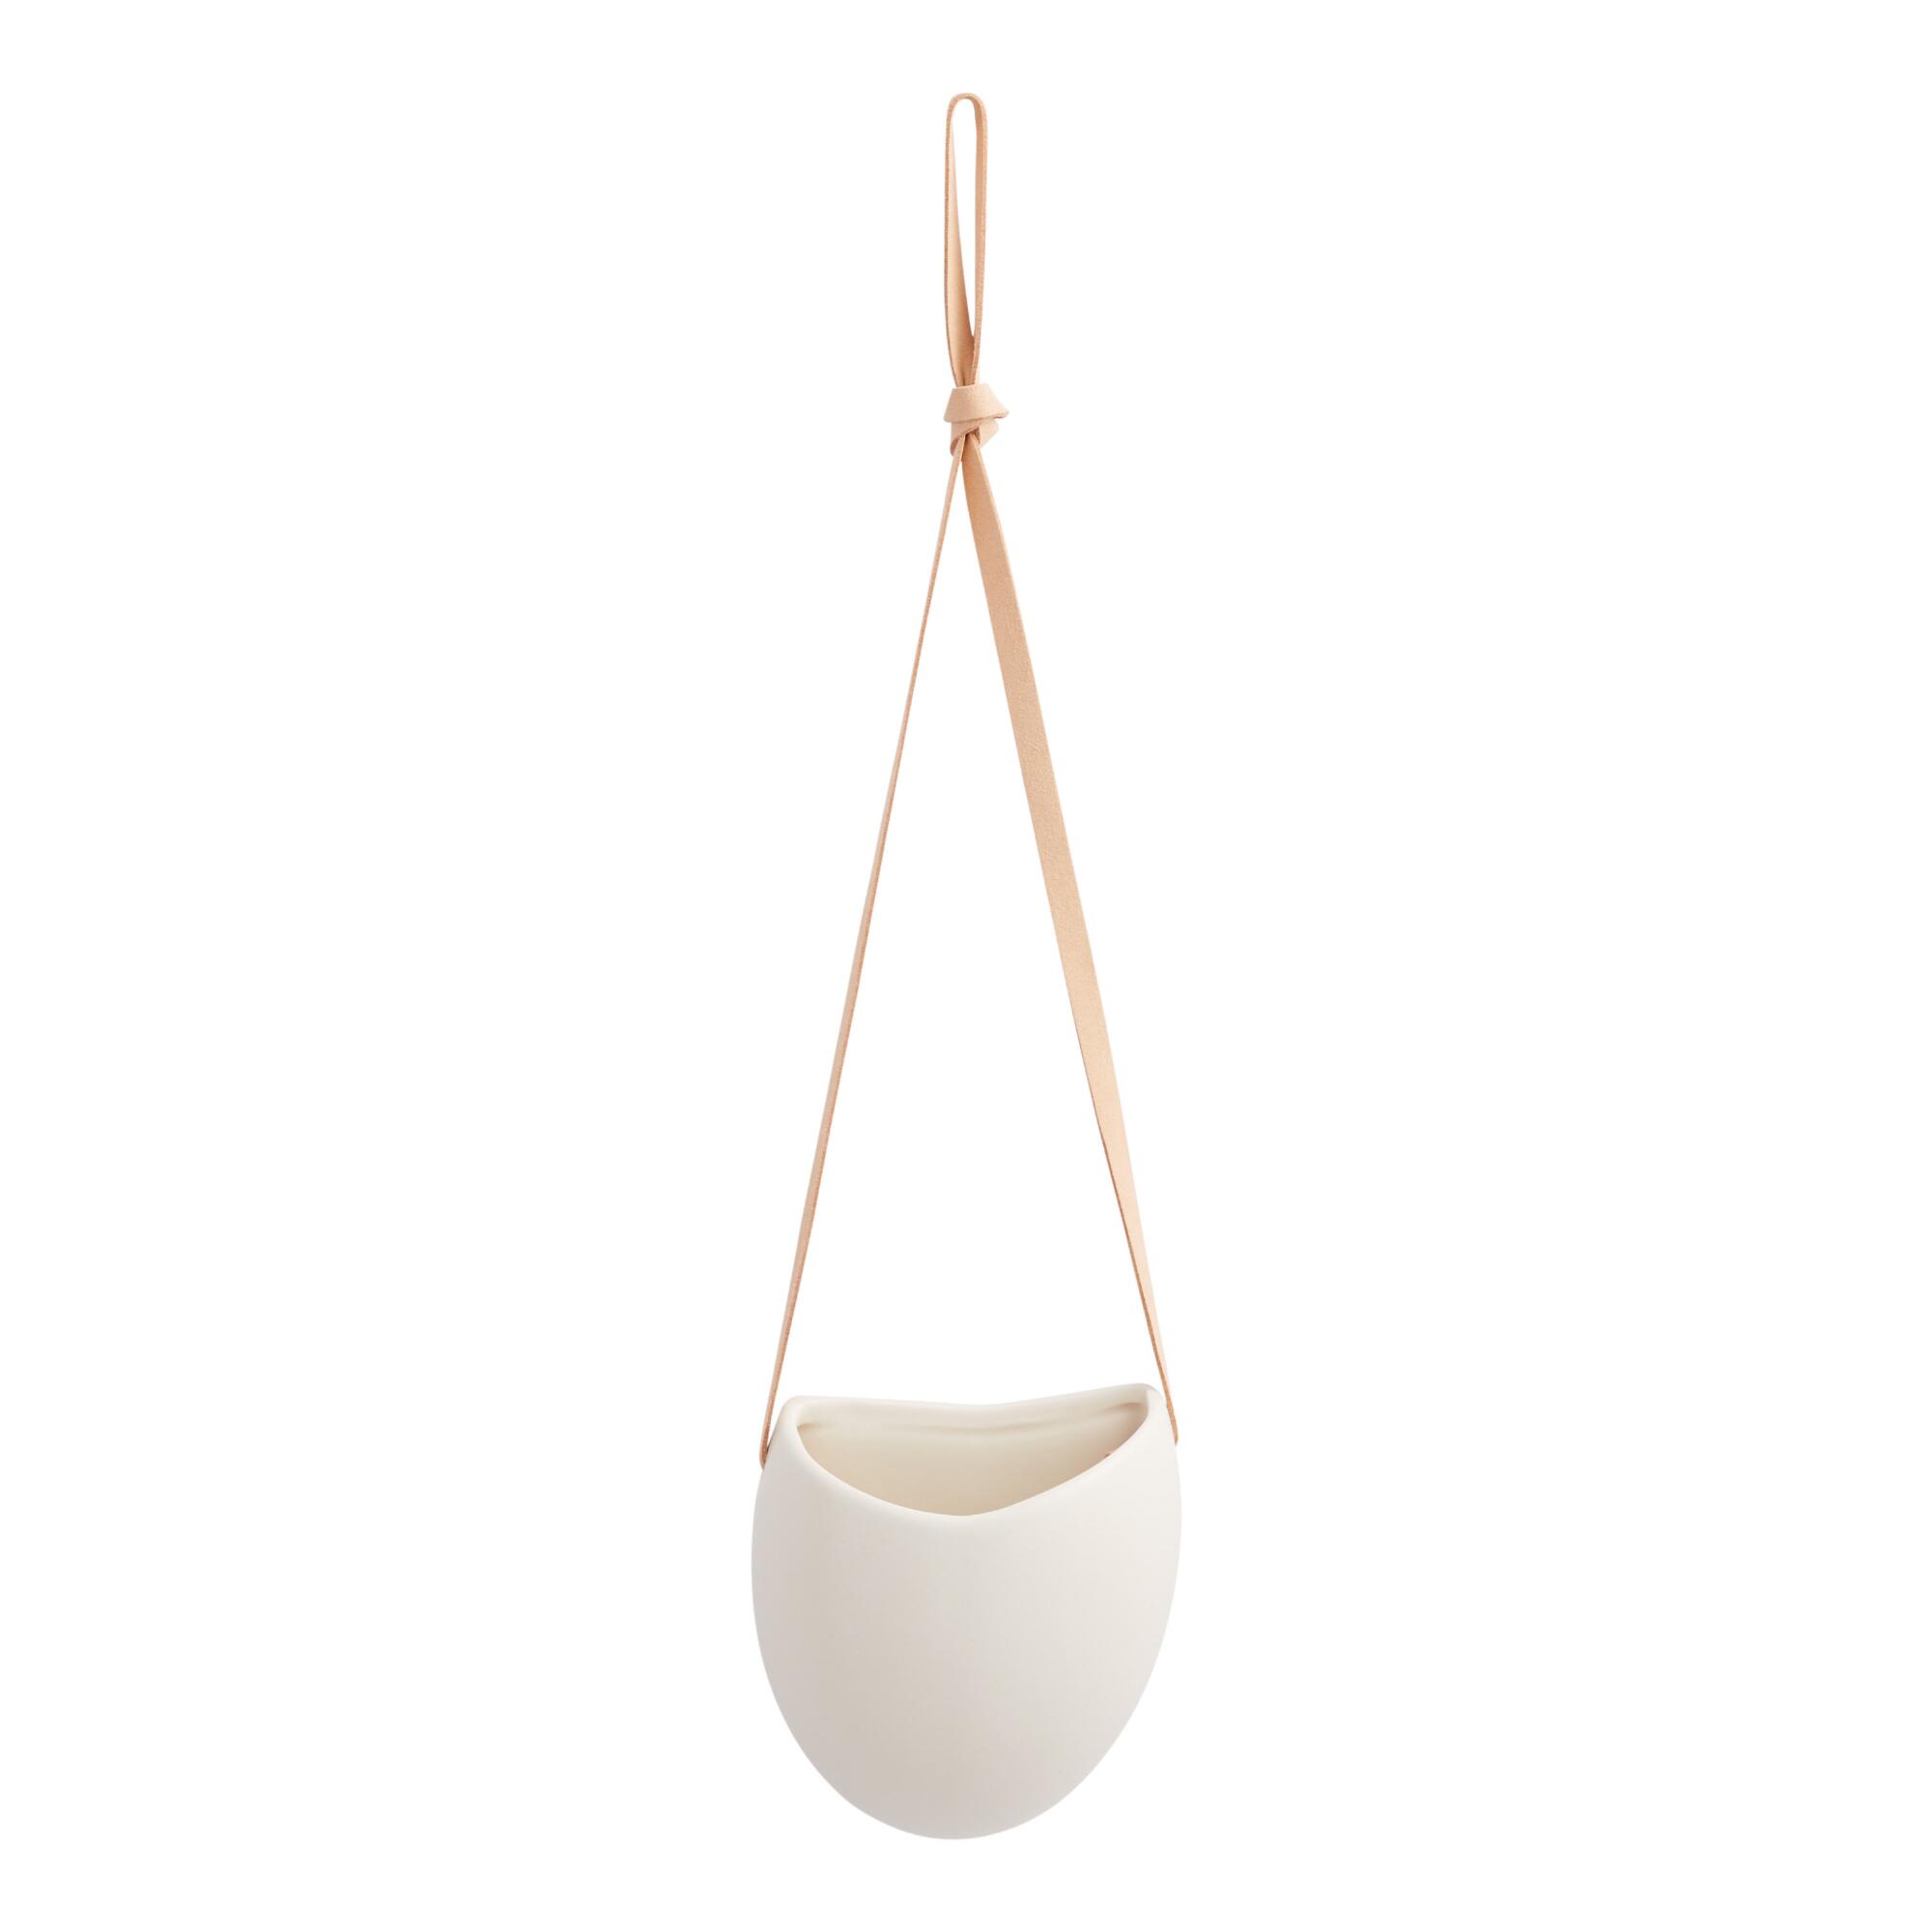 White Ceramic Hanging Wall Planter With Leather Strap by World Market